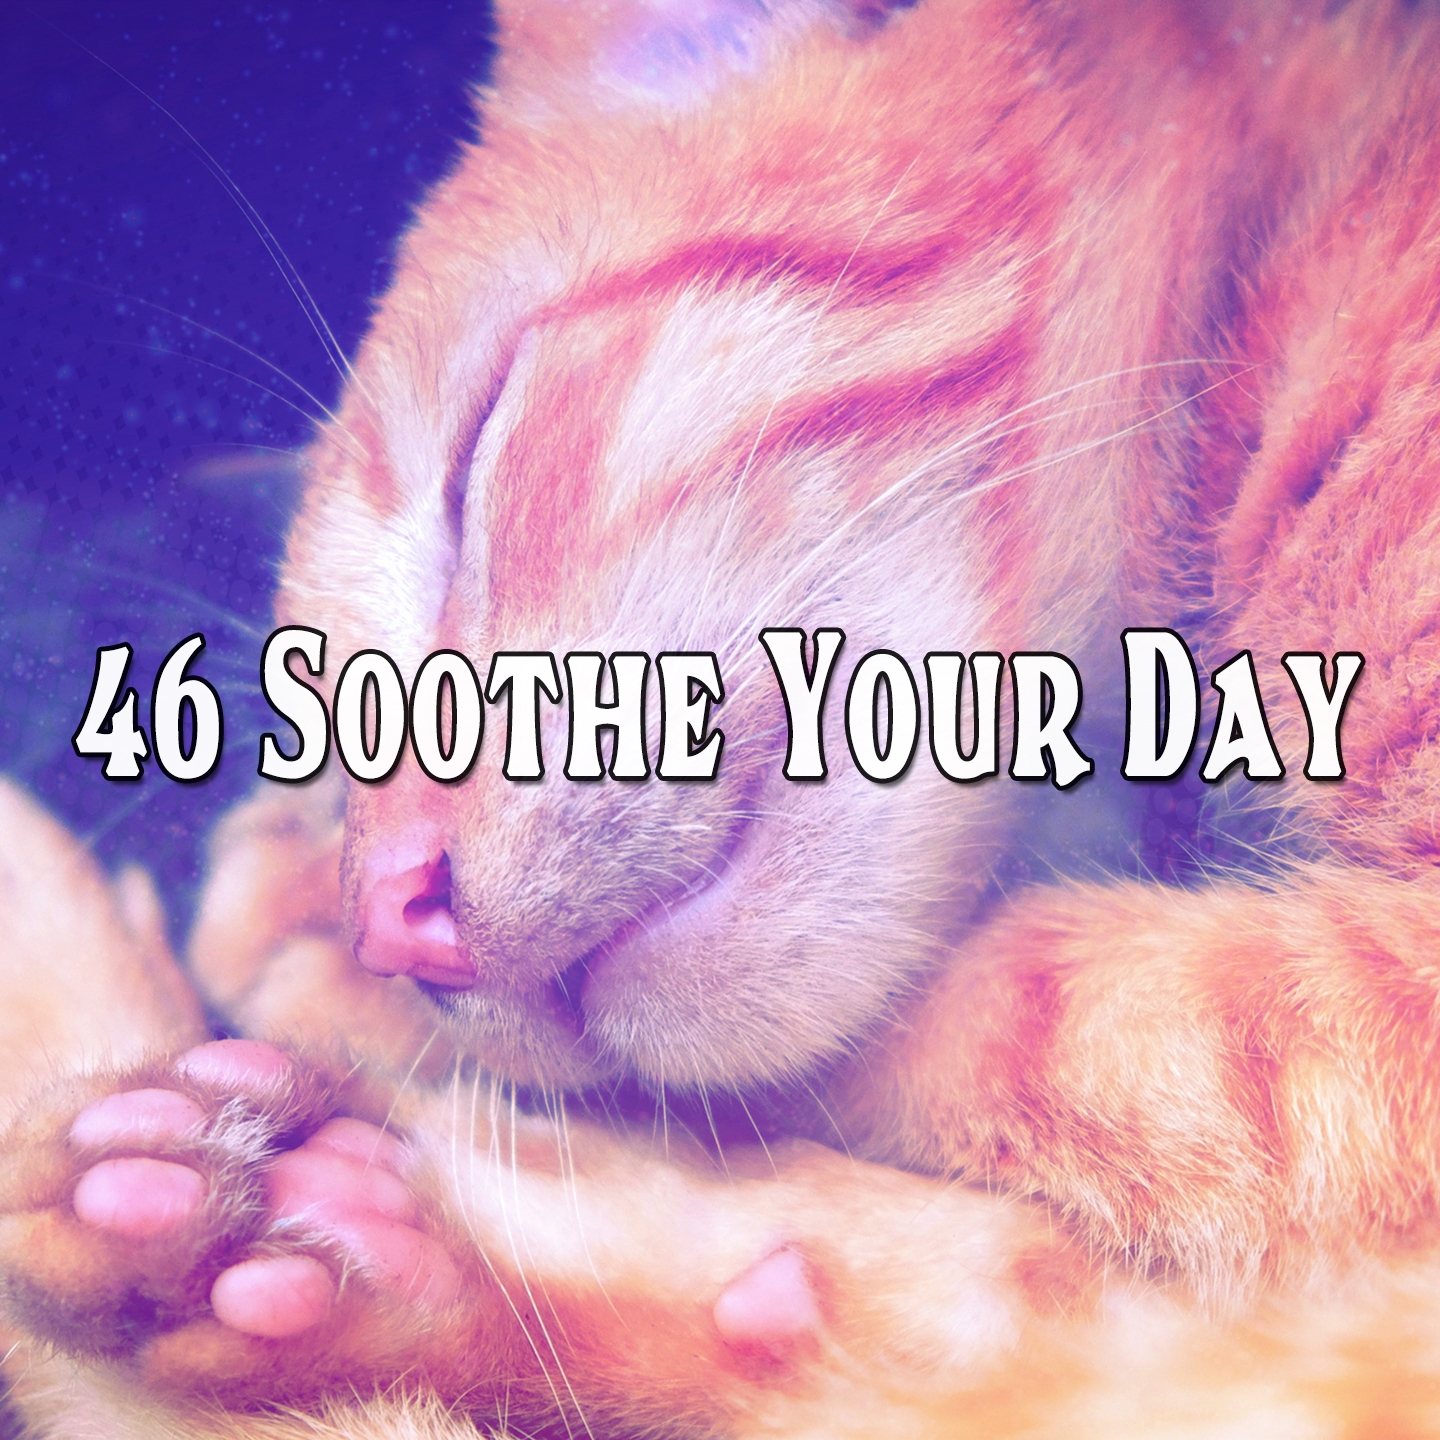 46 Soothe Your Day